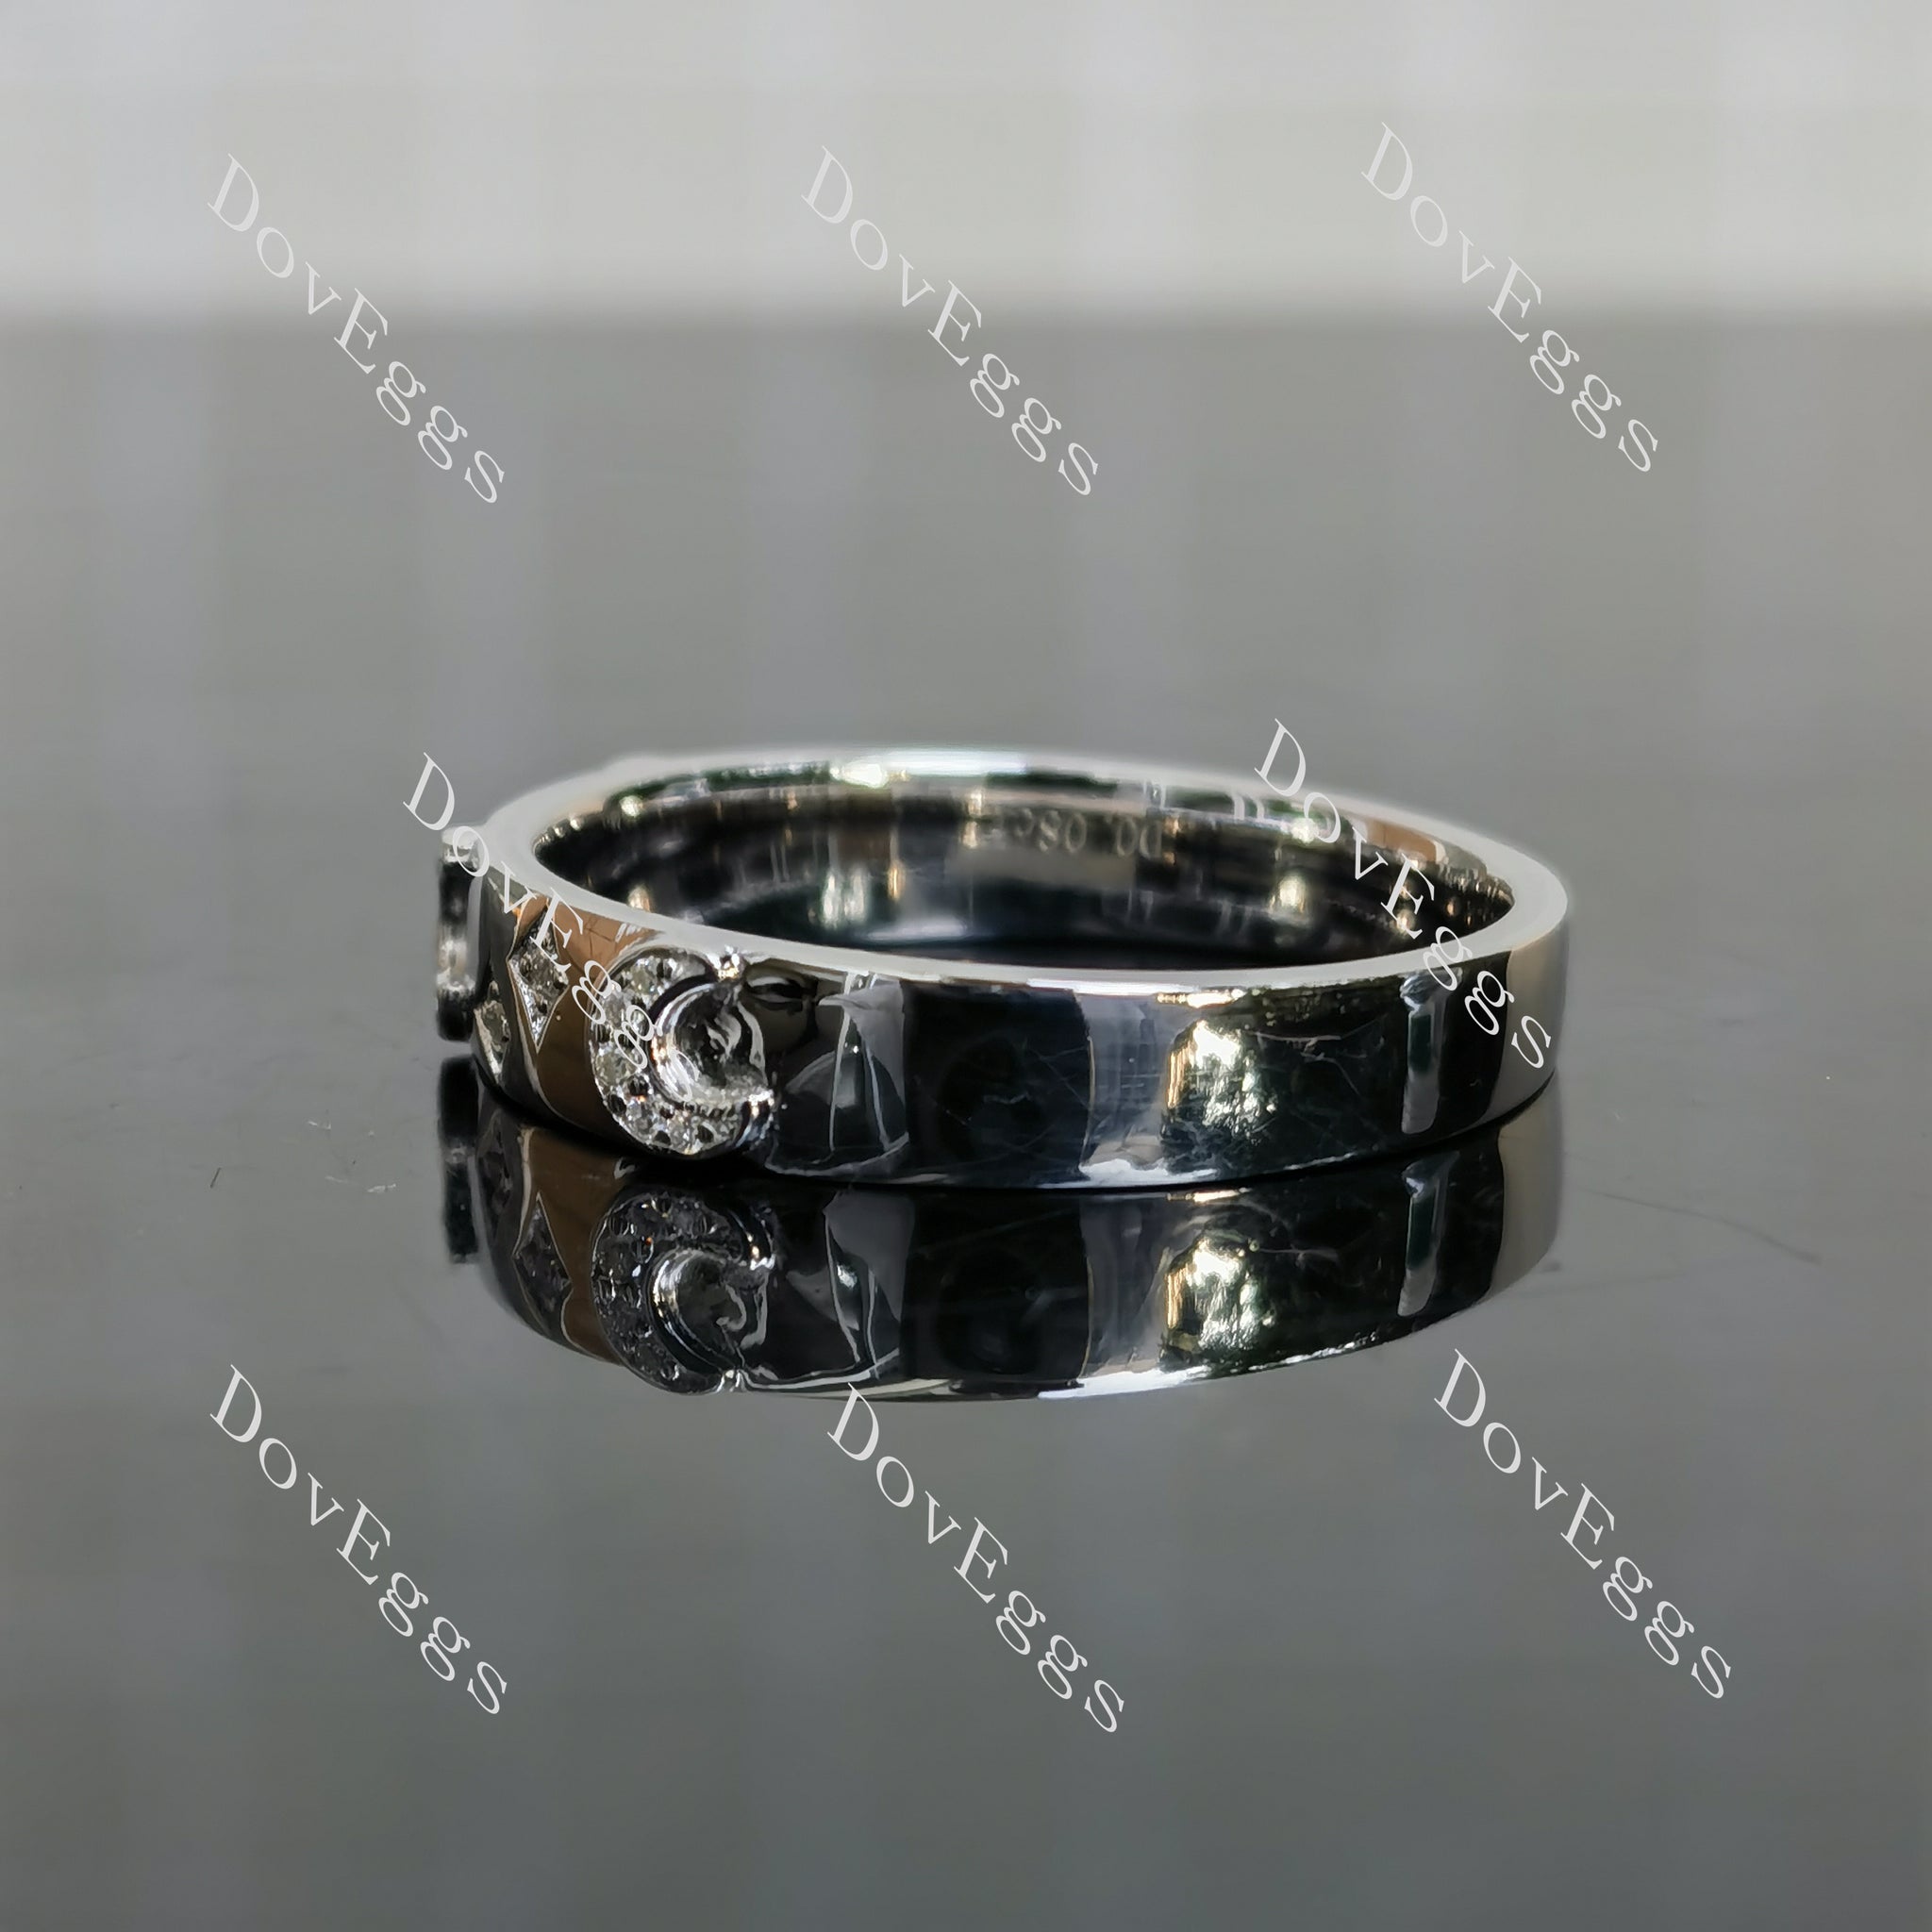 Doveggs star and moon round moissanite wedding band-3.5mm band width